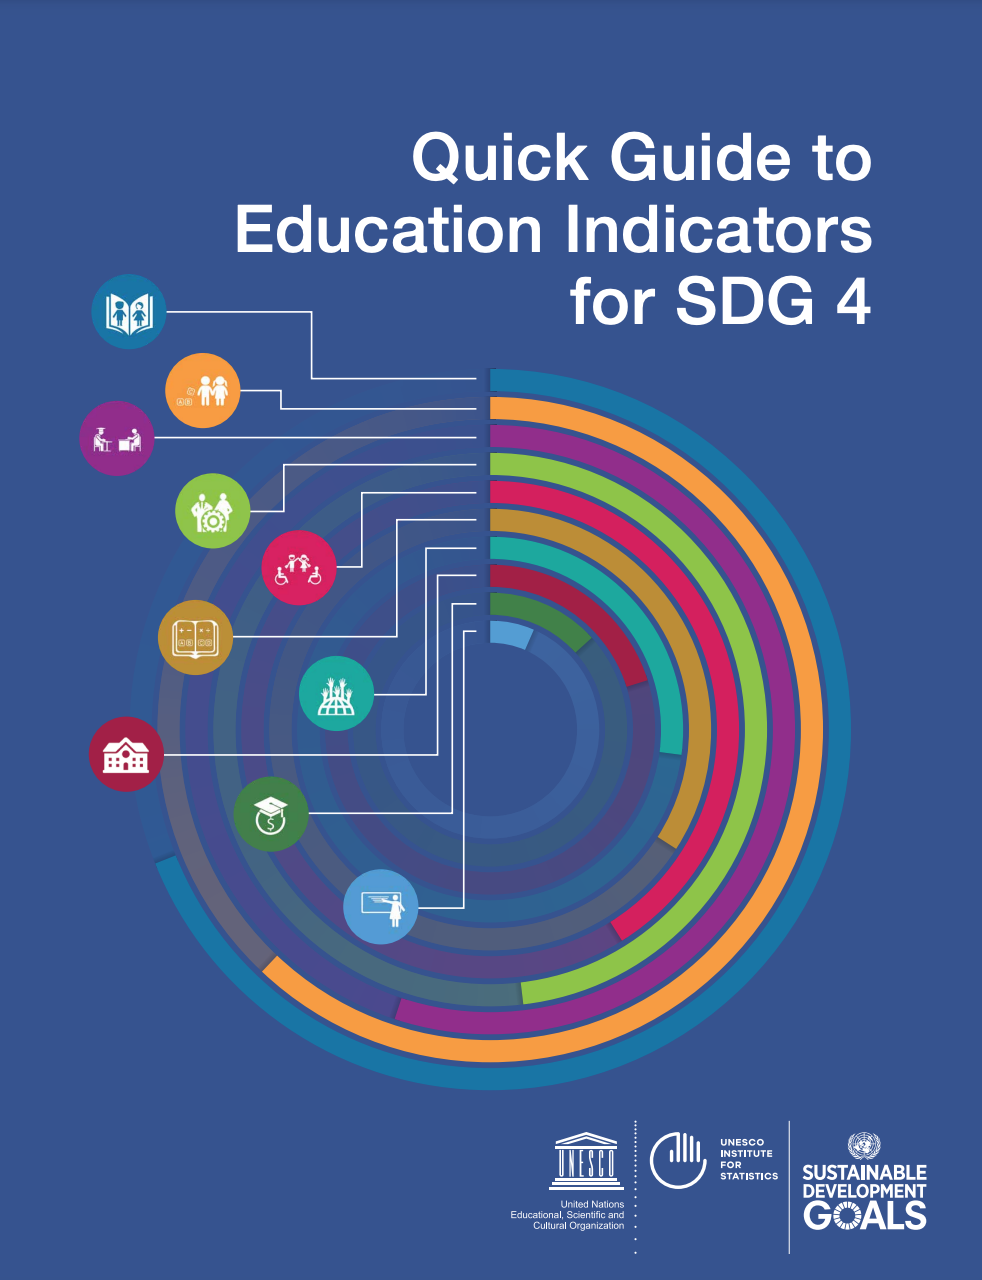 Quick Guide to Education Indicators for SDG 4